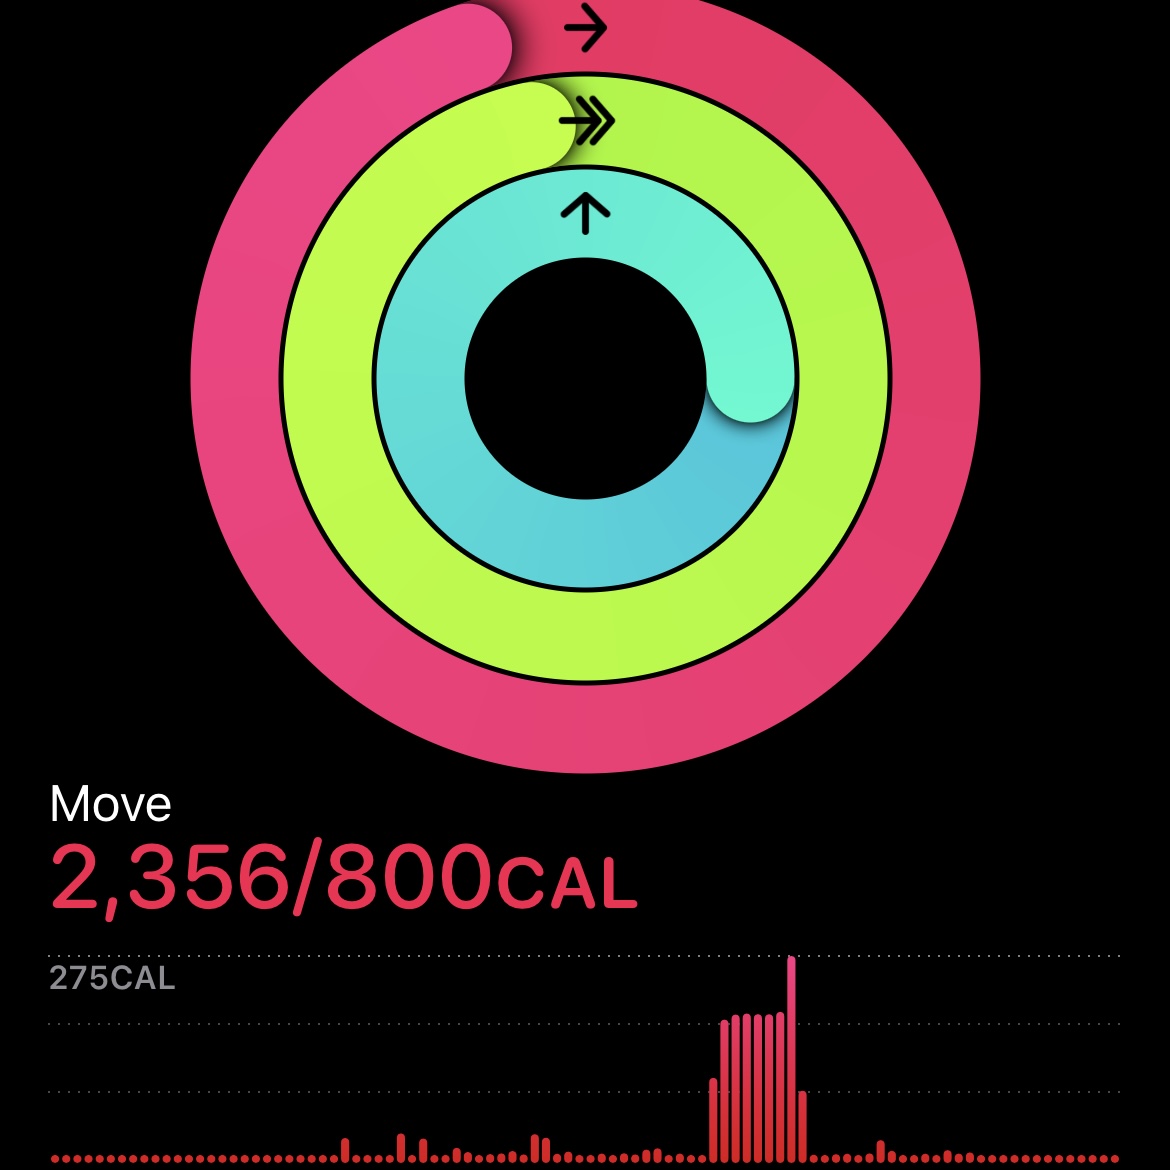 apple watch move goal achieved